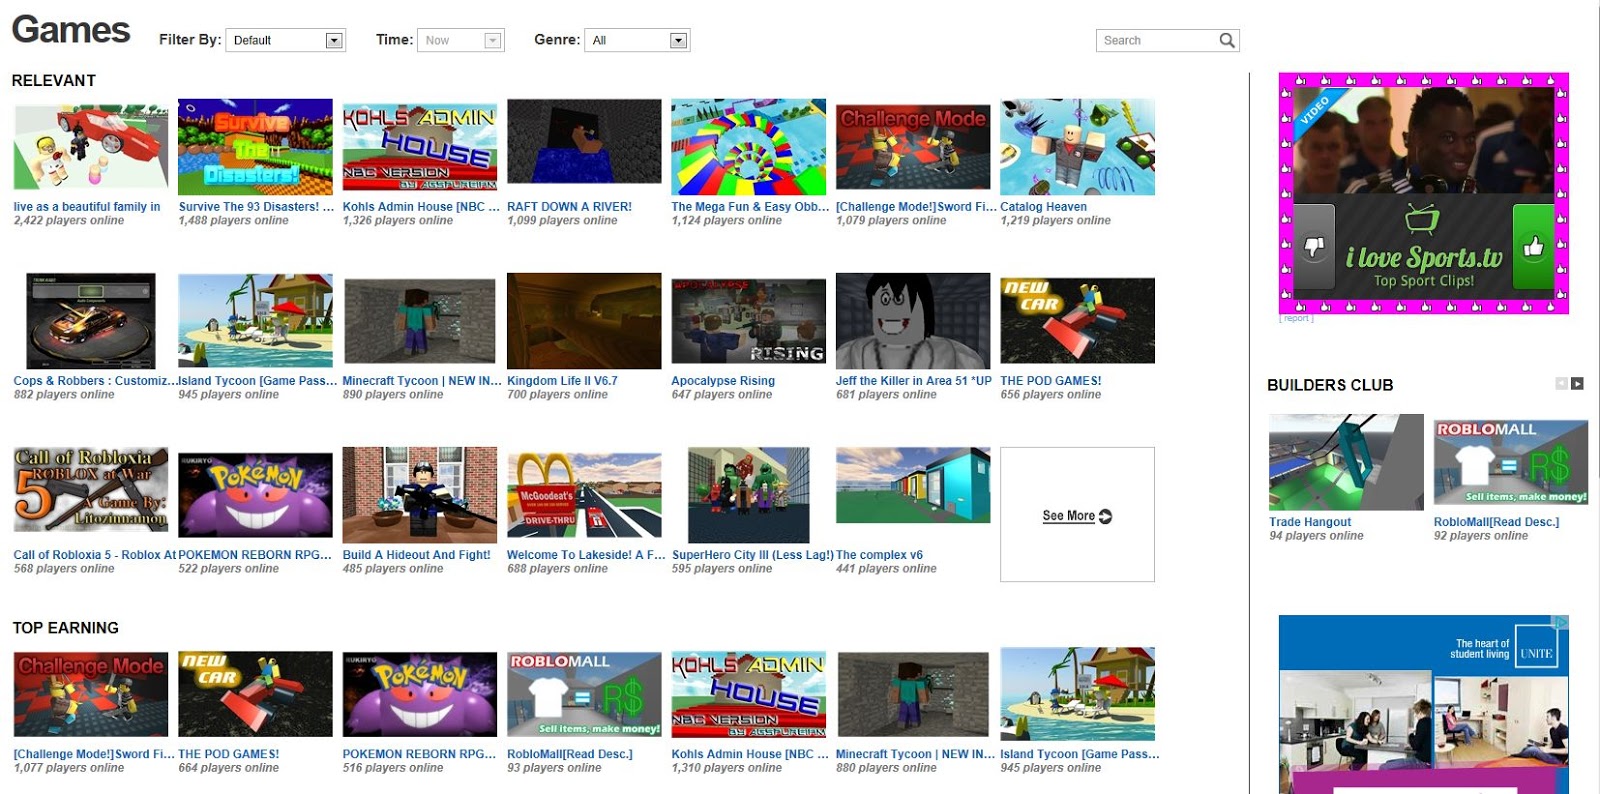 Unofficial Roblox Roblox Games Page Massive Layout Update New Look 2013 - game roblox blog